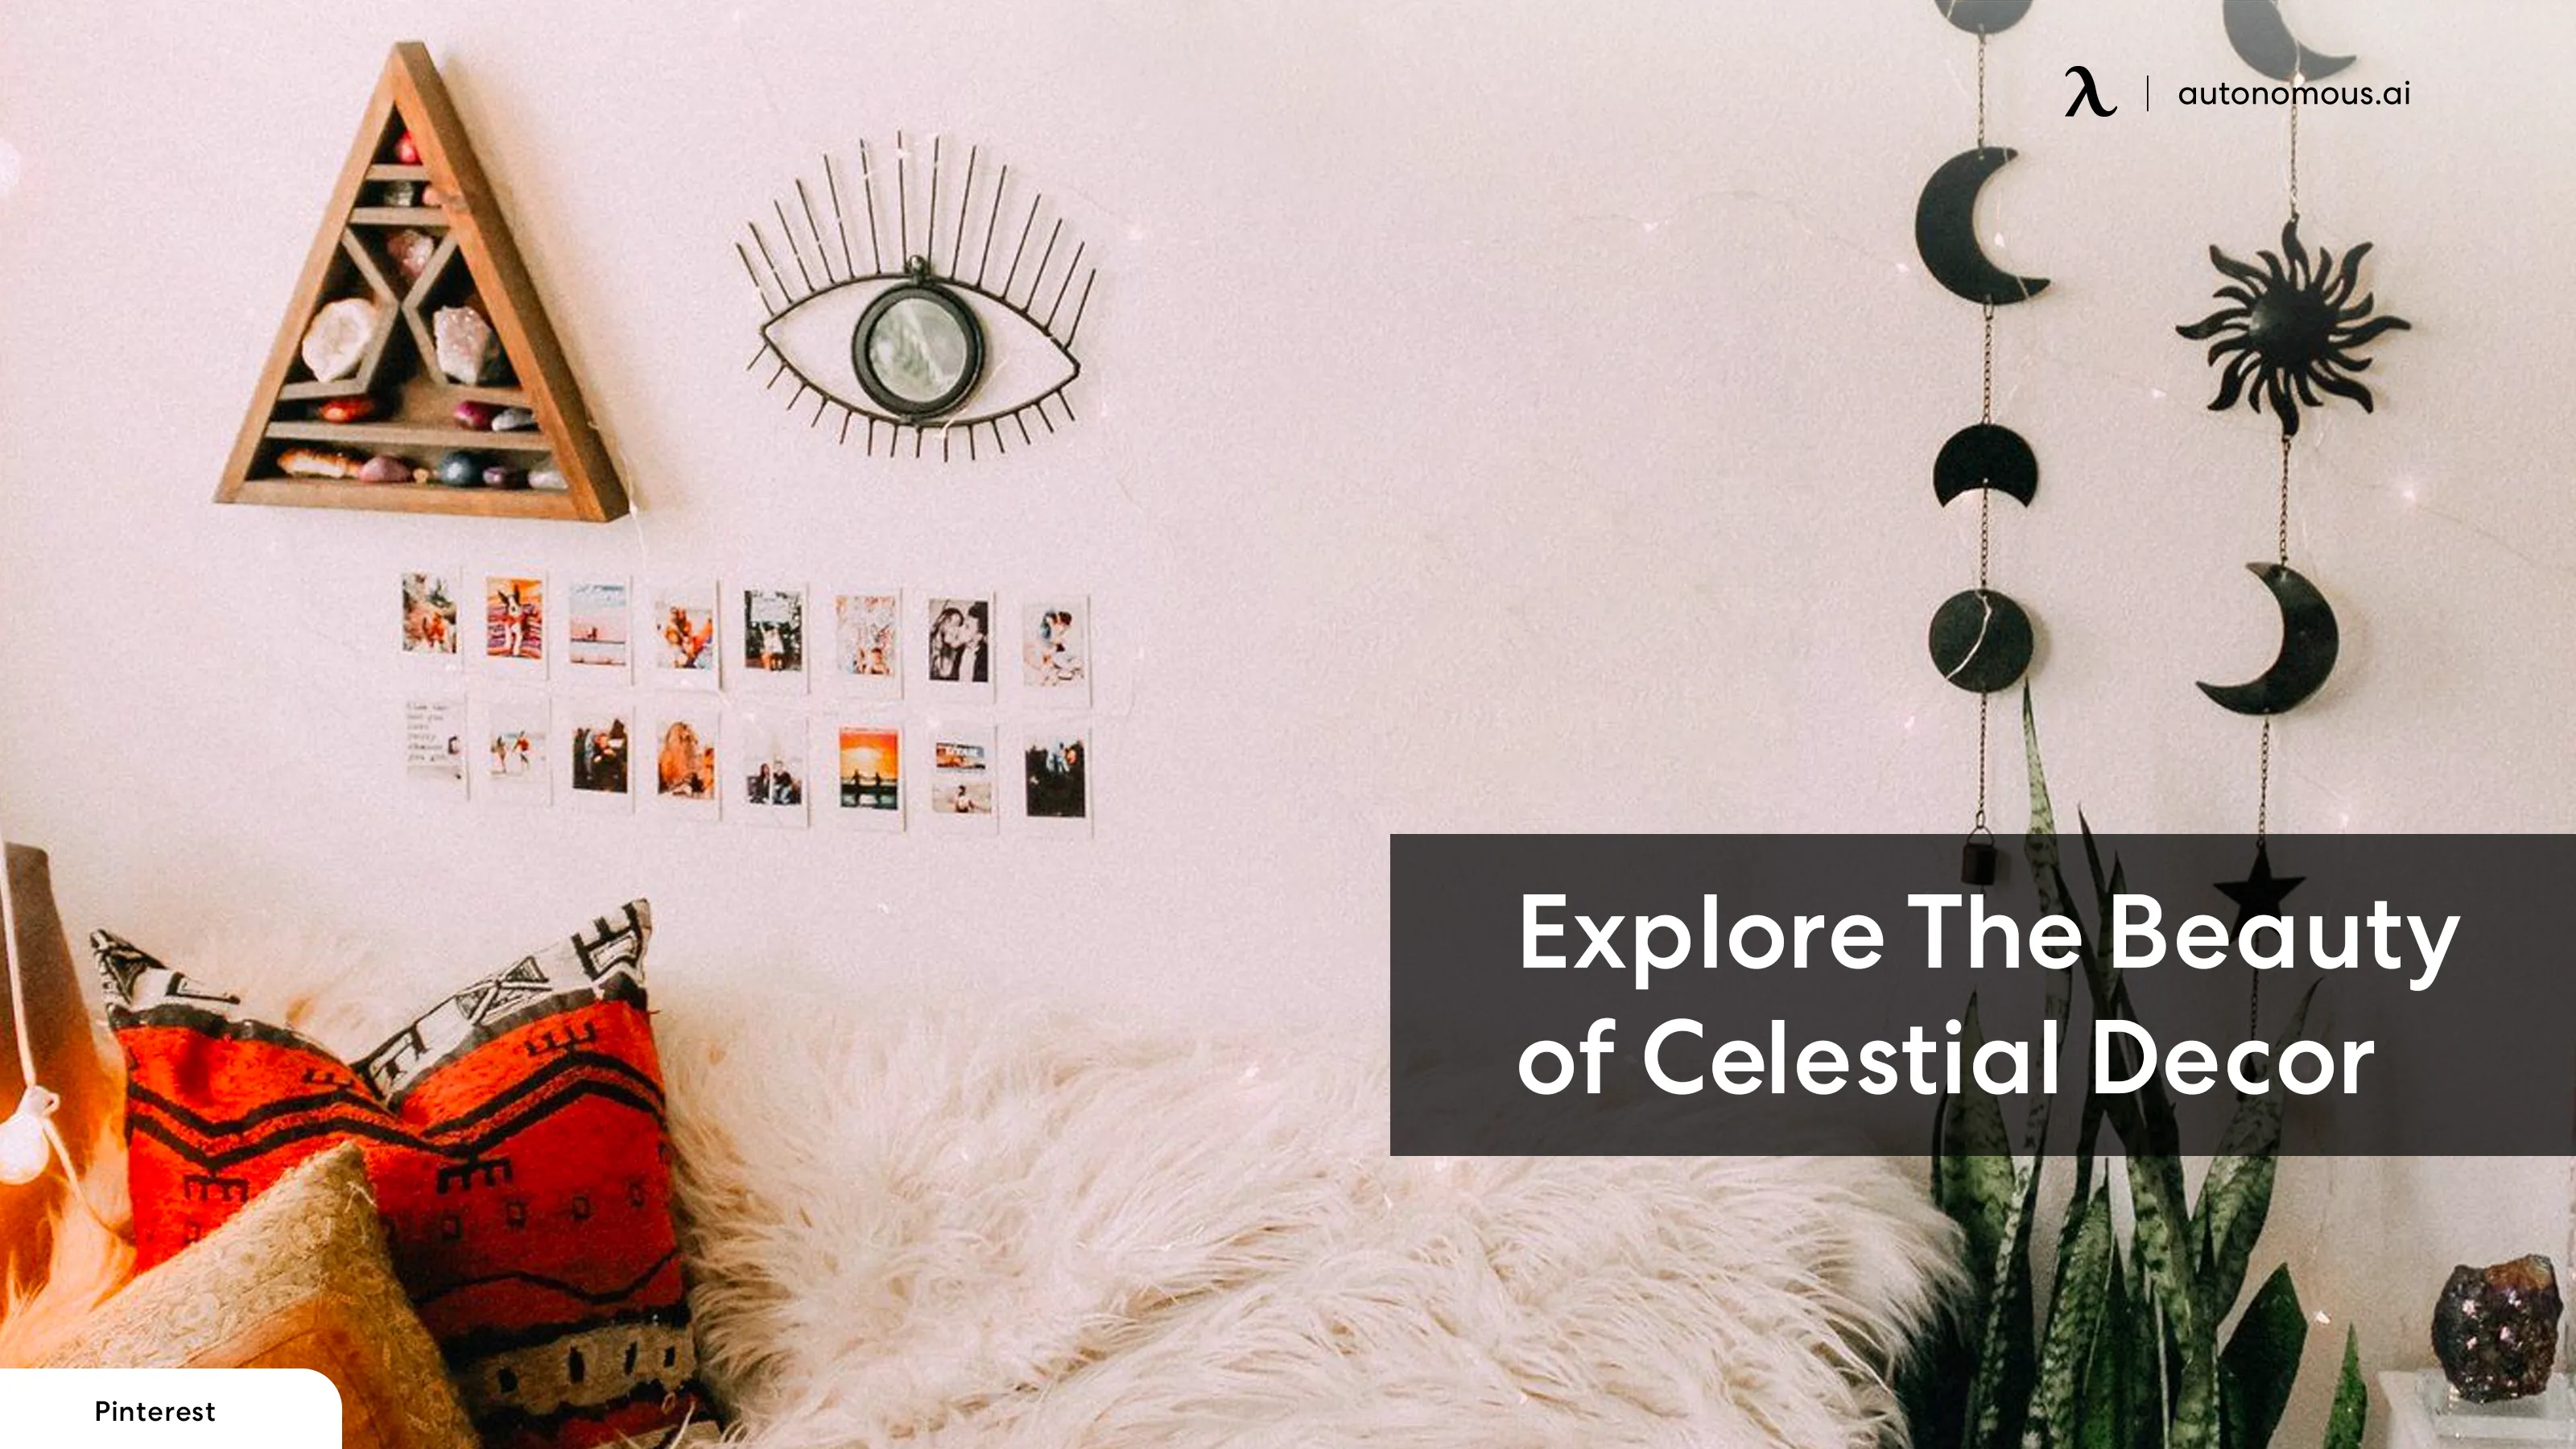 Explore The Beauty of Celestial Decor for Your Home or Office